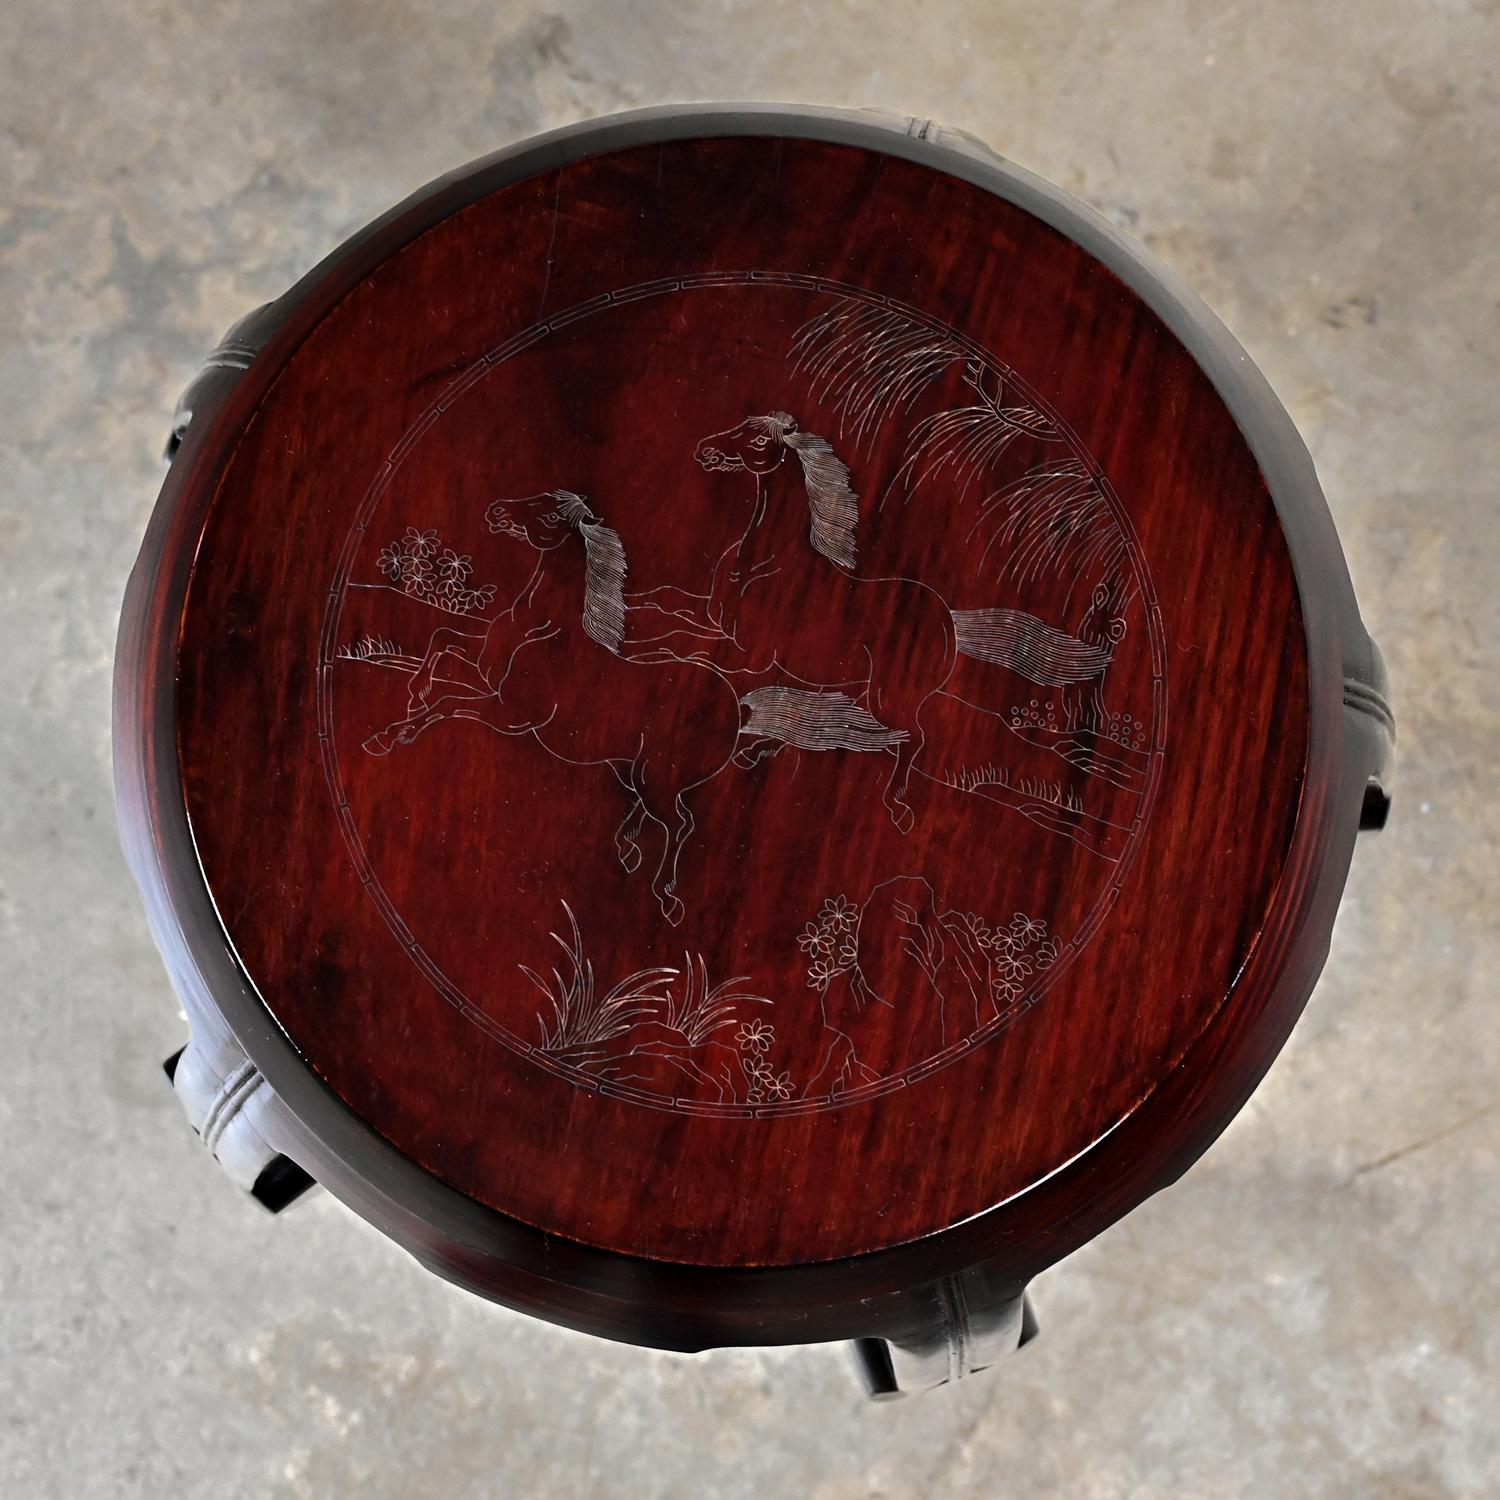 Mid 20th Century Chinoiserie Asian Rosewood Barrel Drum Table or Garden Stool In Good Condition For Sale In Topeka, KS